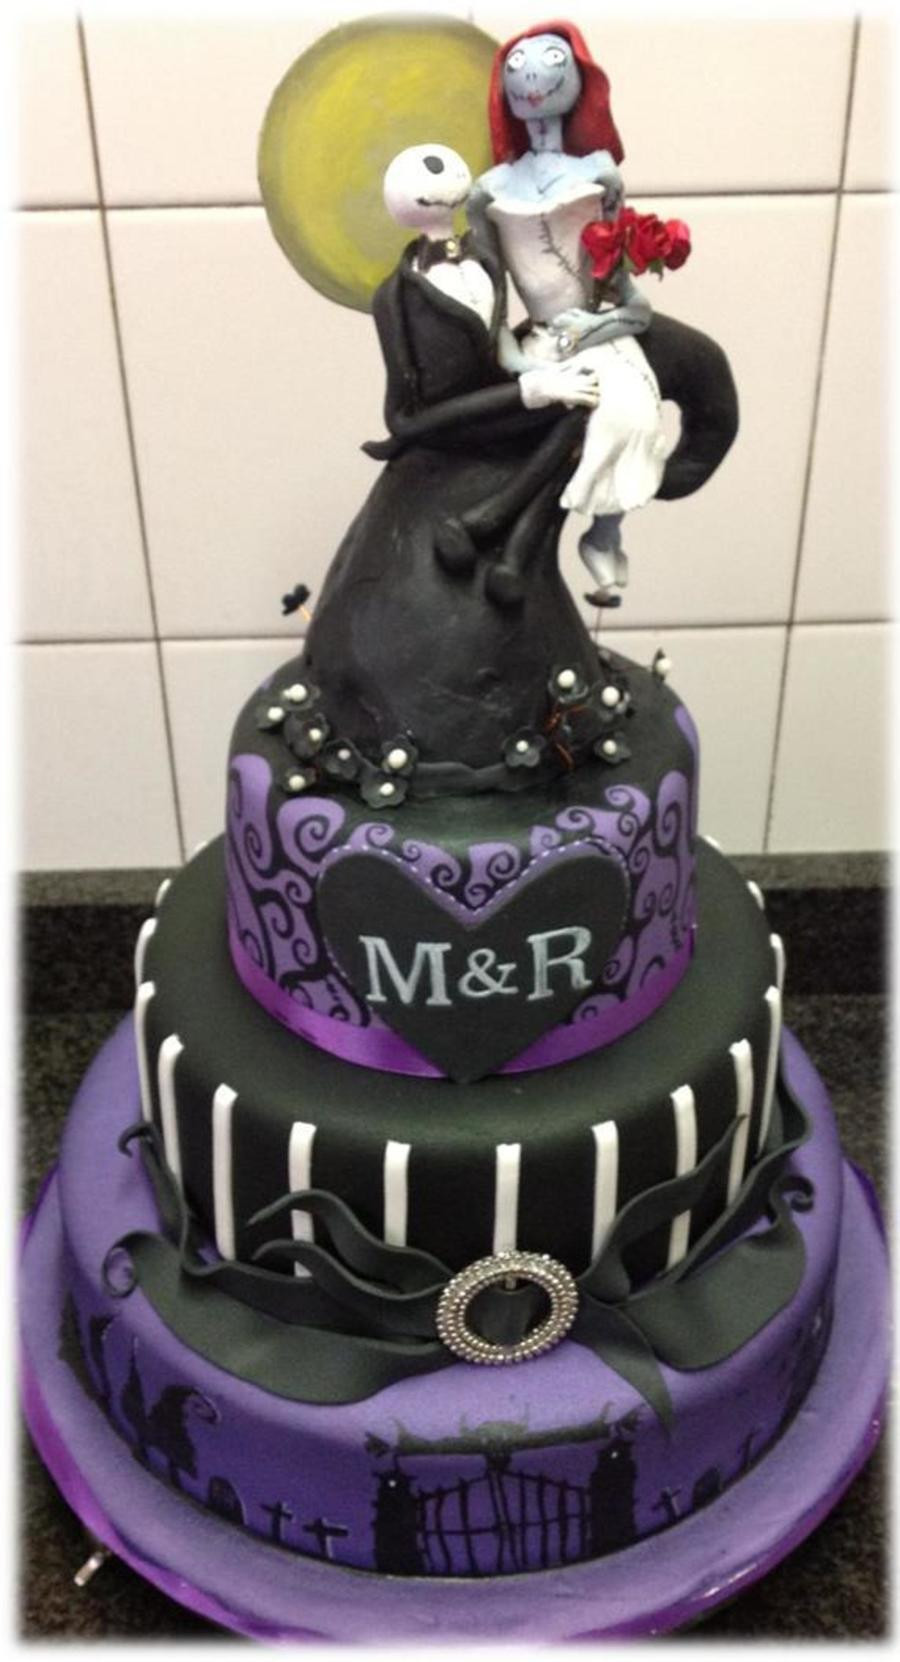 Nightmare Before Christmas Cakes Ideas
 This Was A Wedding Cake For A Couple Who Wanted A